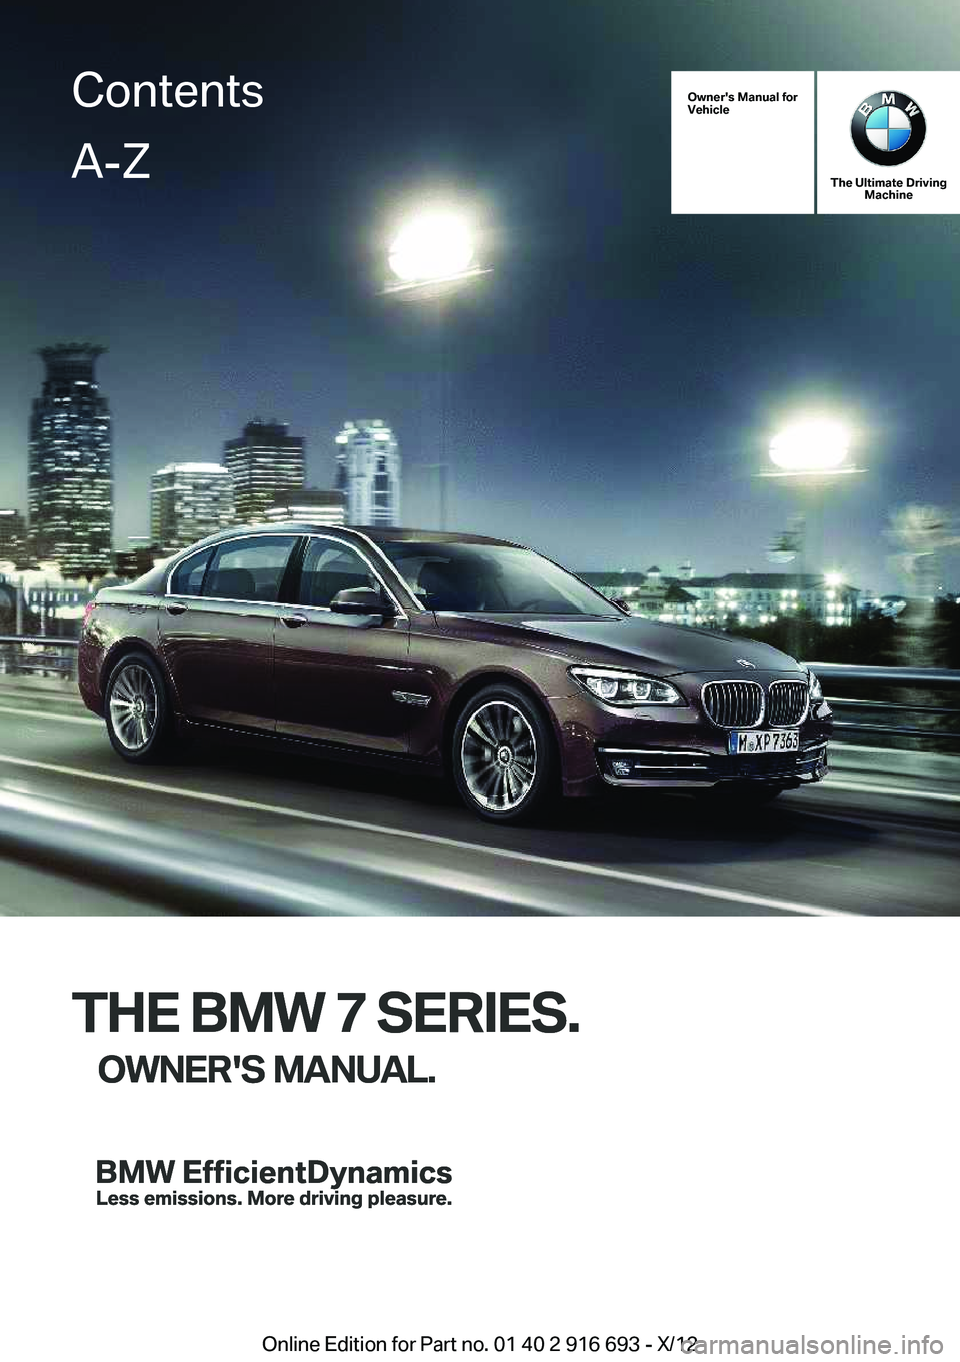 BMW 750LI 2013  Owners Manual Owner's Manual for
Vehicle
THE BMW 7 SERIES.
OWNER'S MANUAL.
The Ultimate Driving Machine
THE BMW 7 SERIES.
OWNER'S MANUAL.
ContentsA-Z
Online Edition for Part no. 01 40 2 916 693 - X/12  